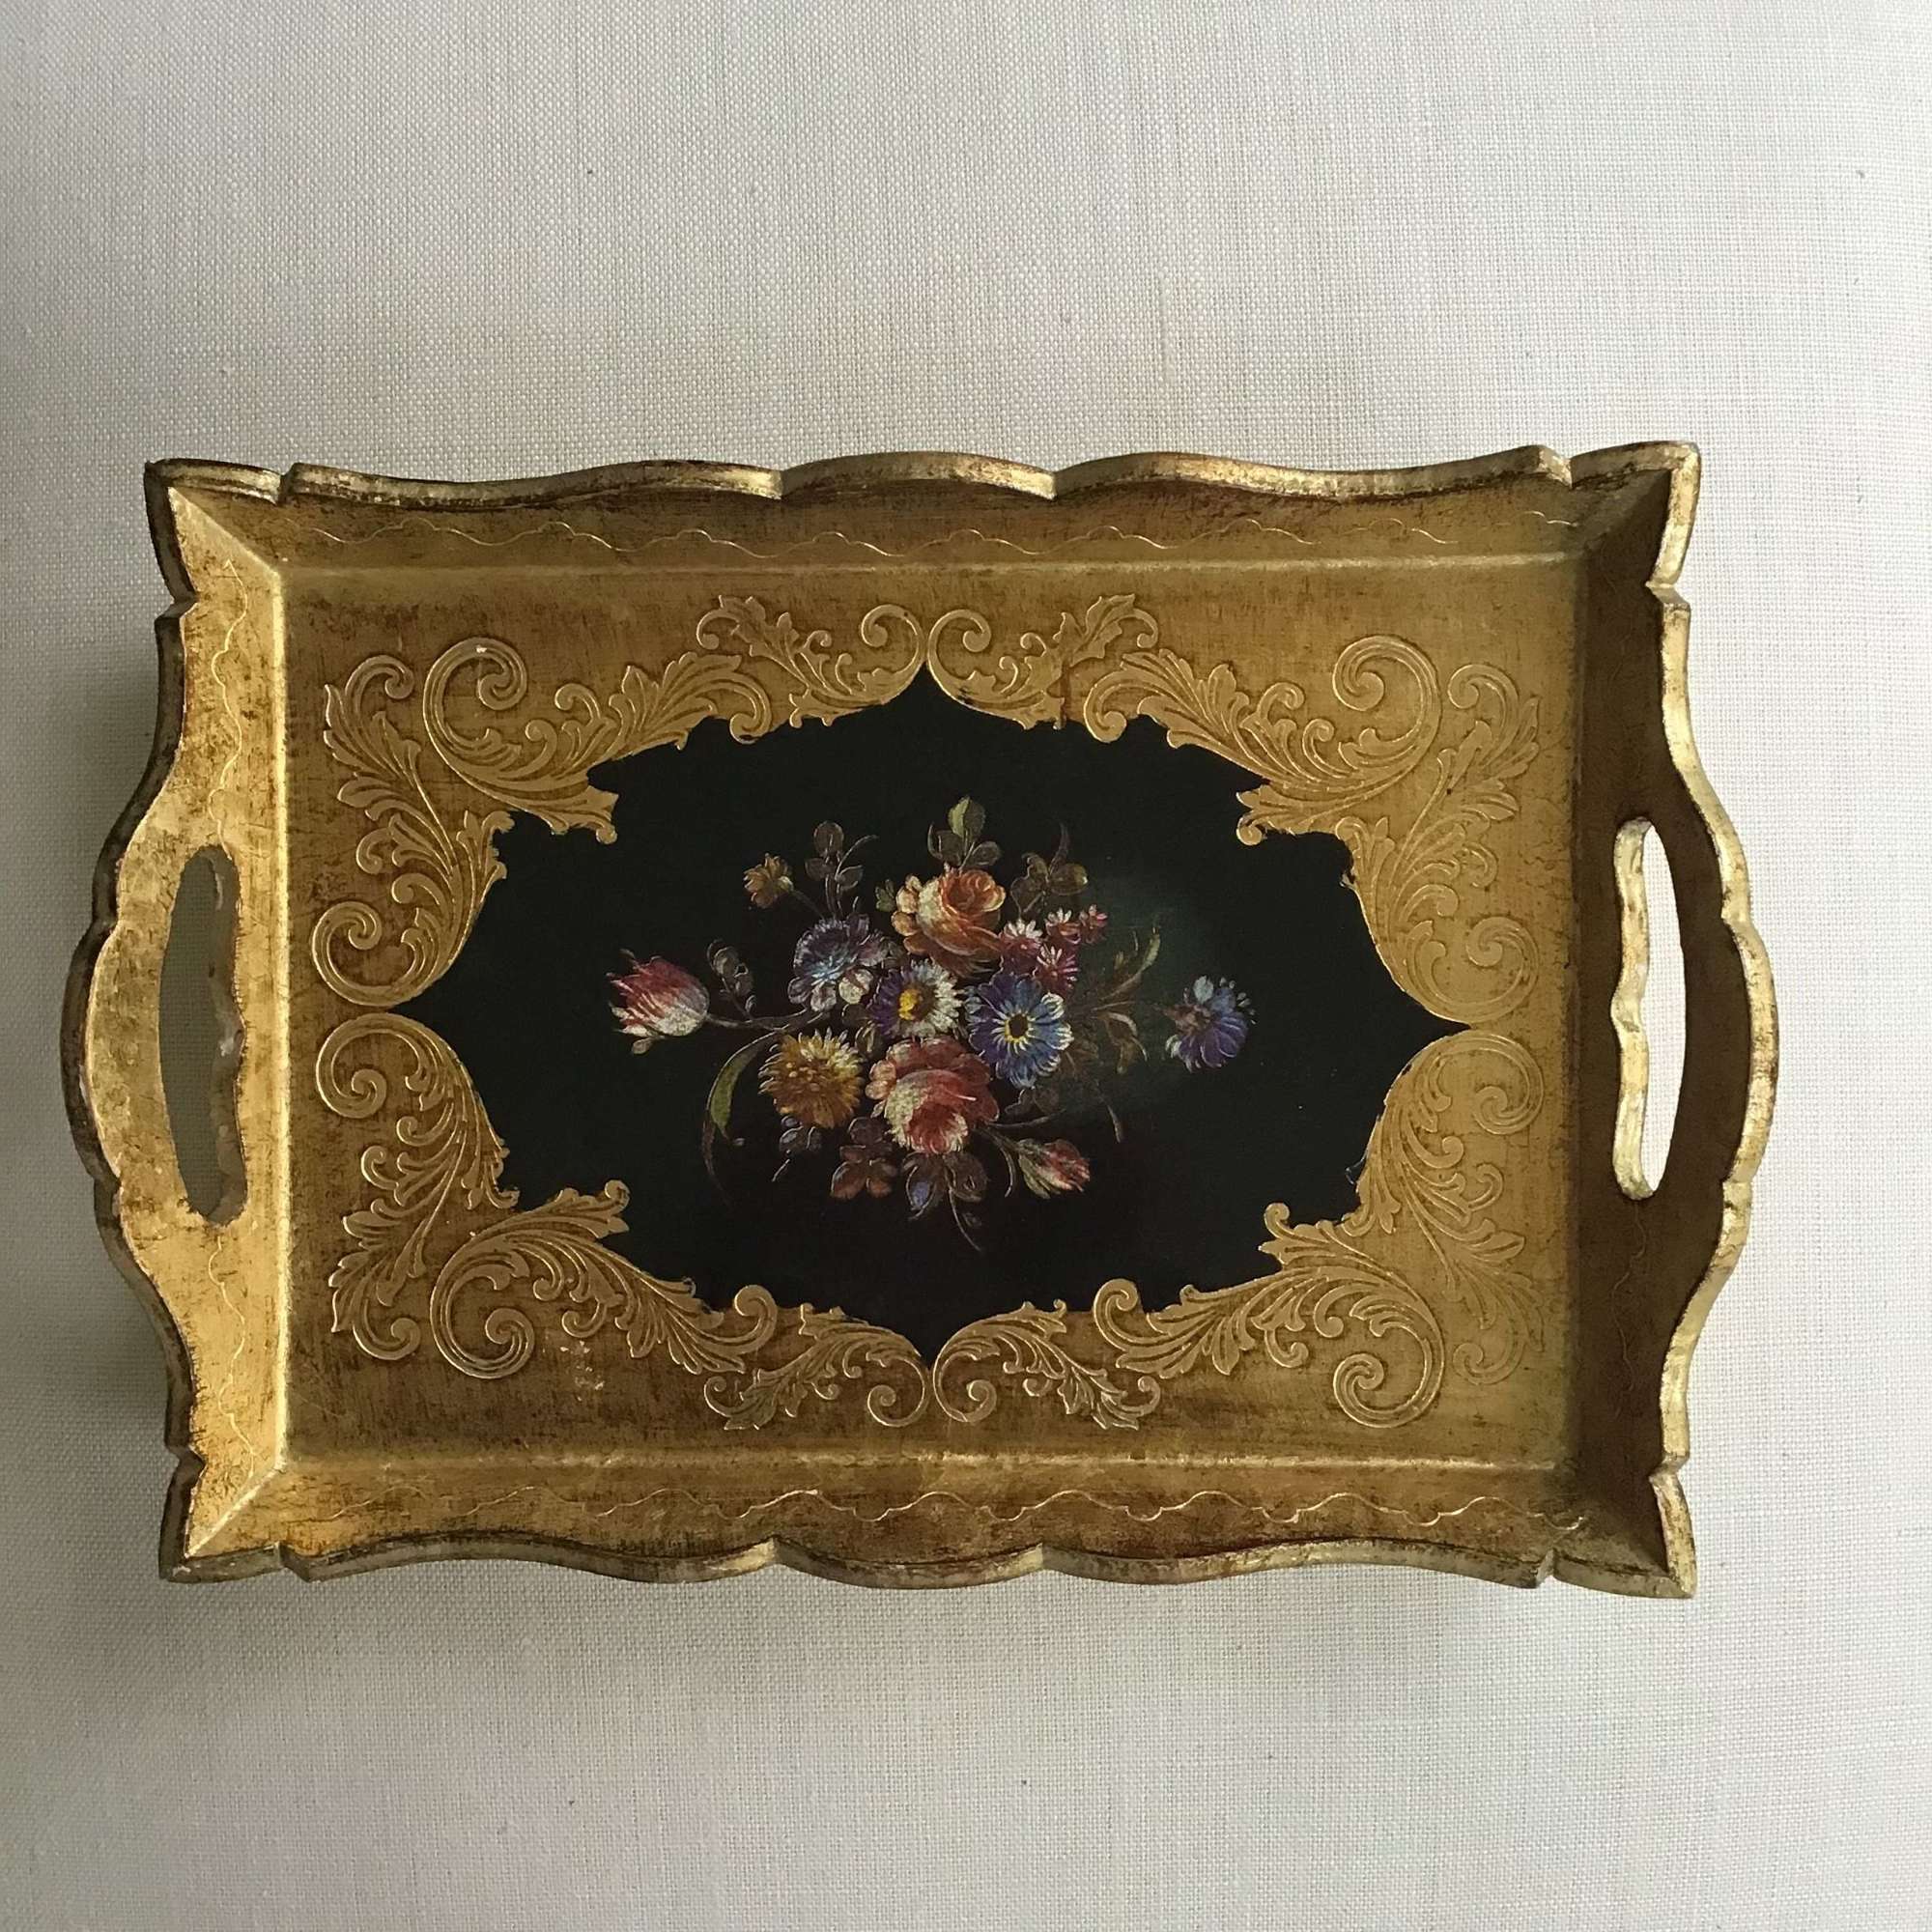 Florentine gilded painted wooden tray with floral design in centre